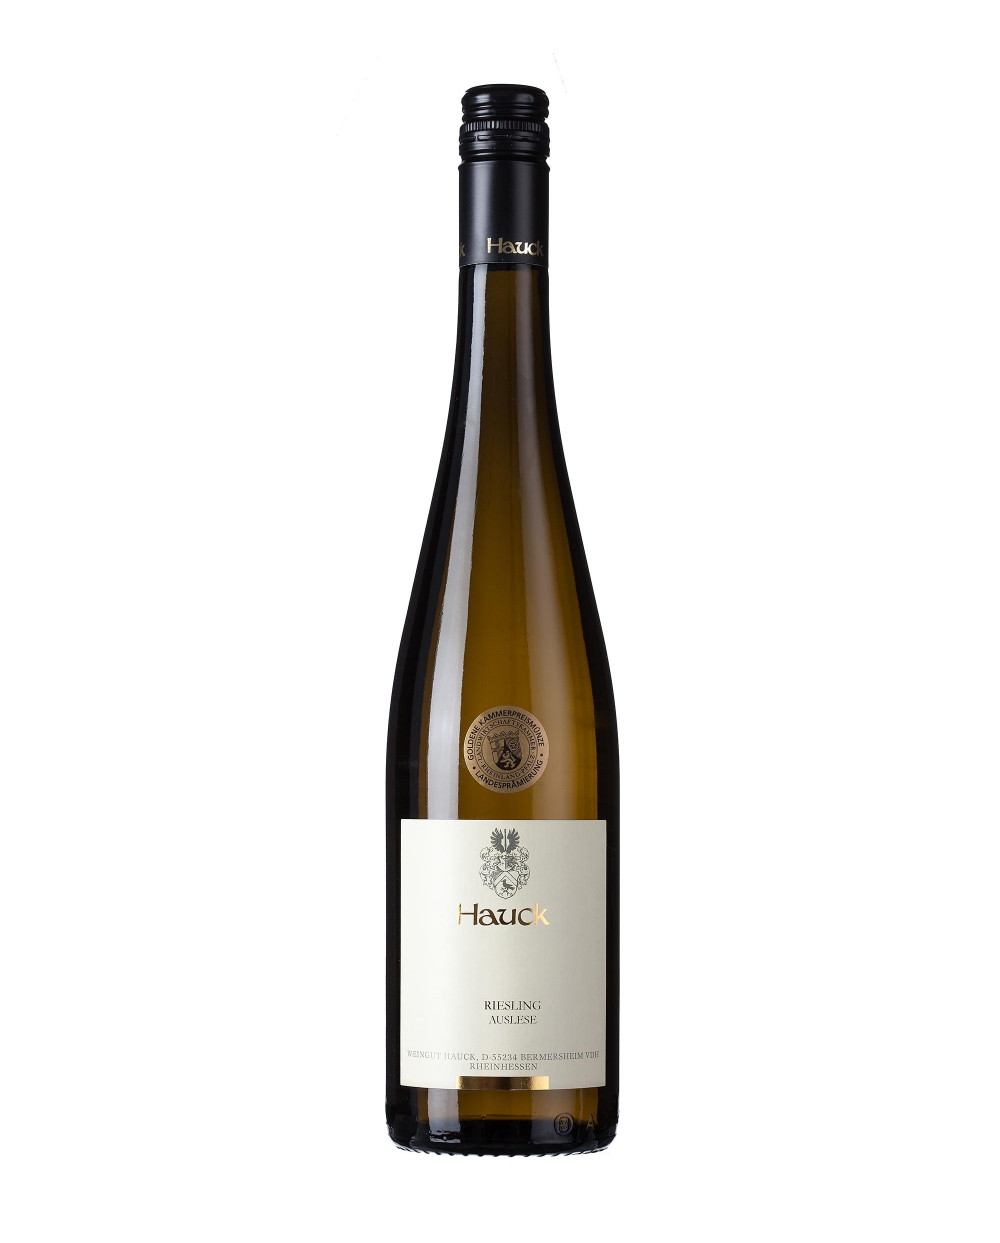 2017 Riesling Auslese Weingut Hauck